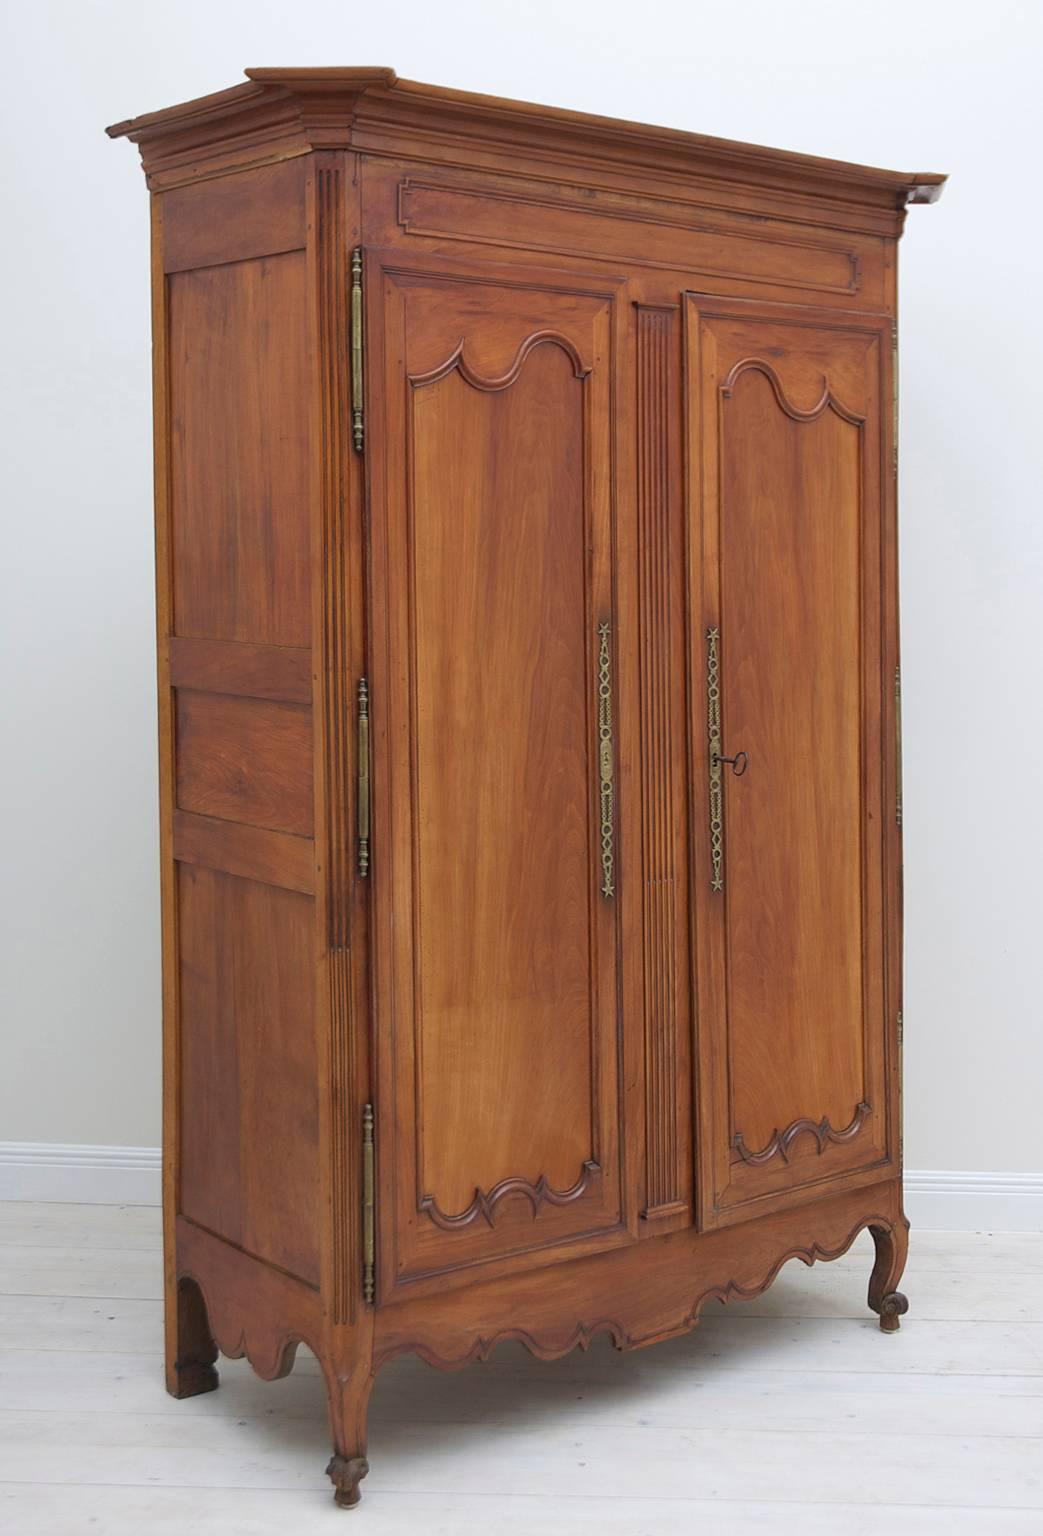 A handsome Louis XV armoire with stately proportions. Offers straight, stepped crown molding with chamfered corners, curvilinear molded inset panels on two doors, fluted astragal that is attached to one of the doors which allows both doors to open